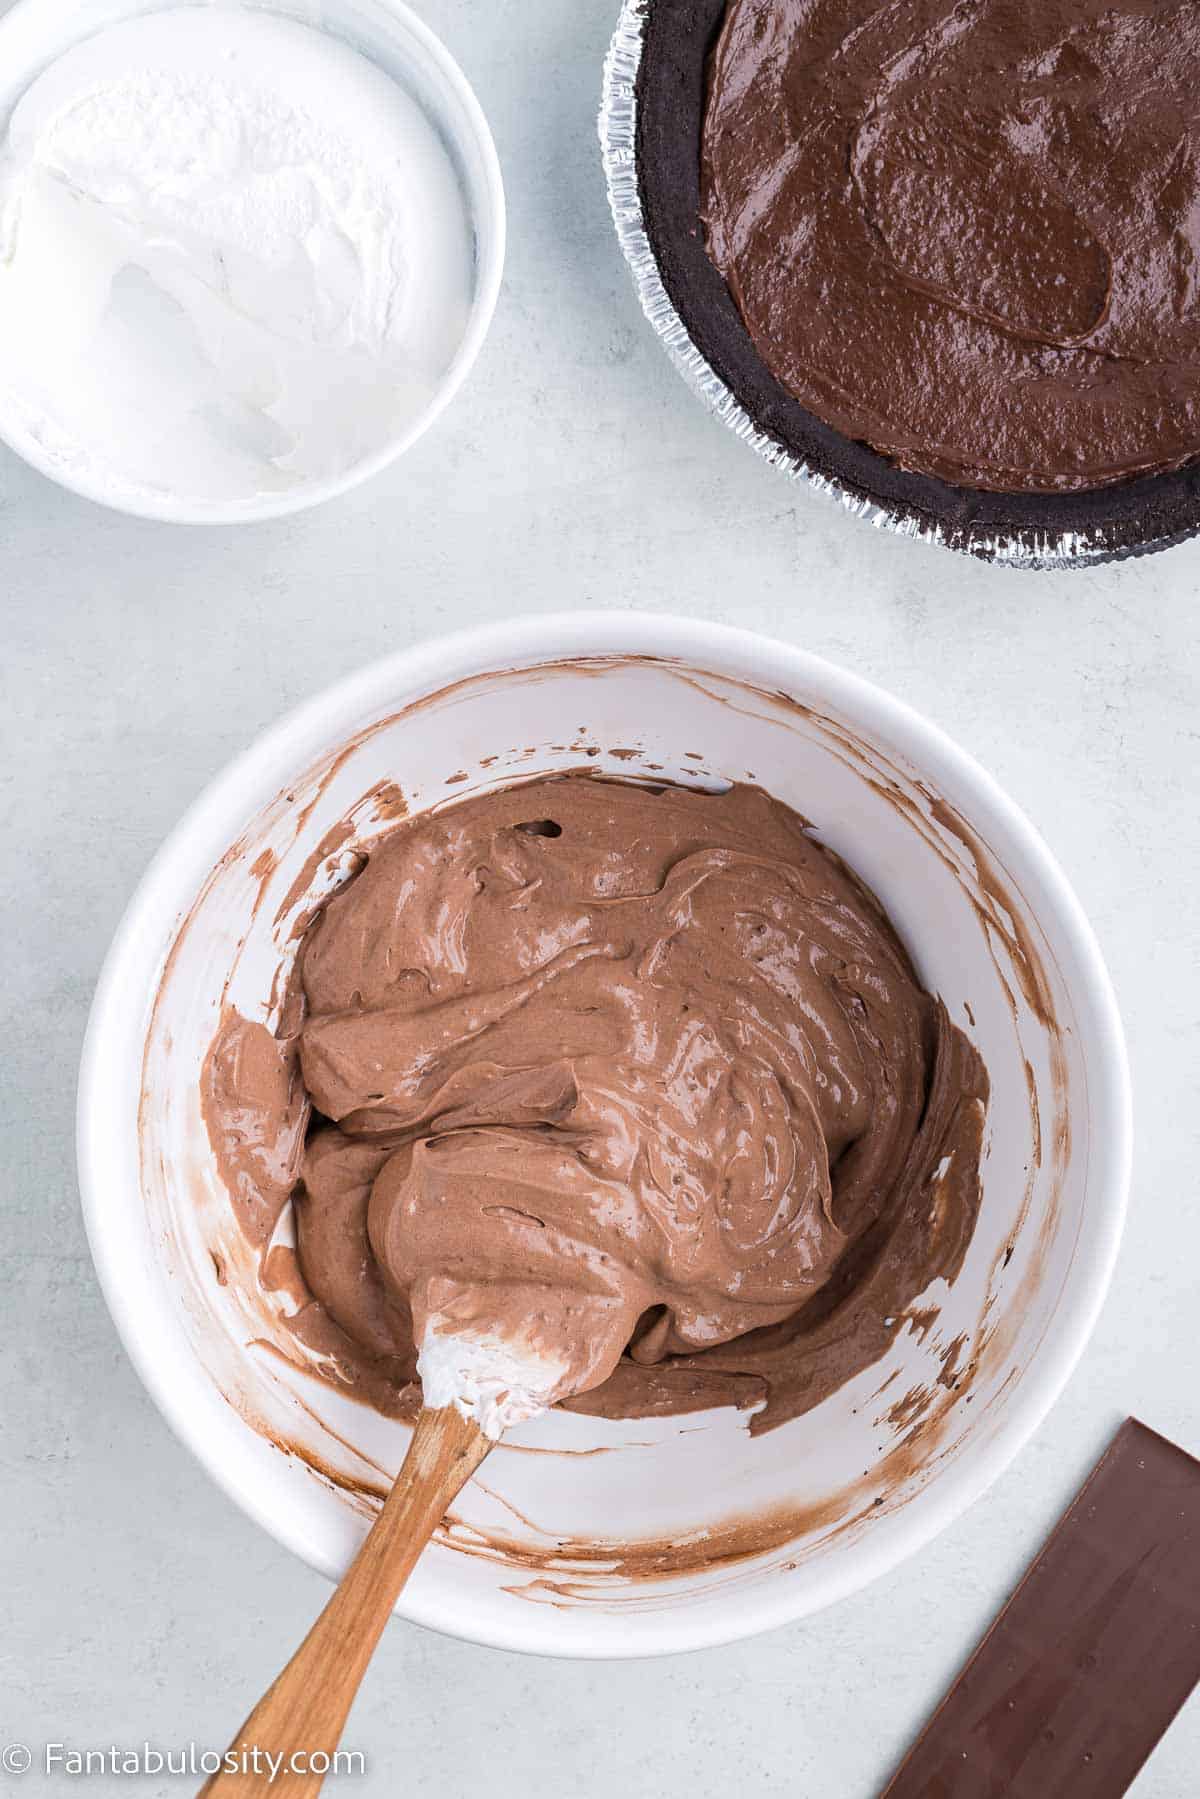 Chocolate and whipped cream mixture in white mixing bowl.